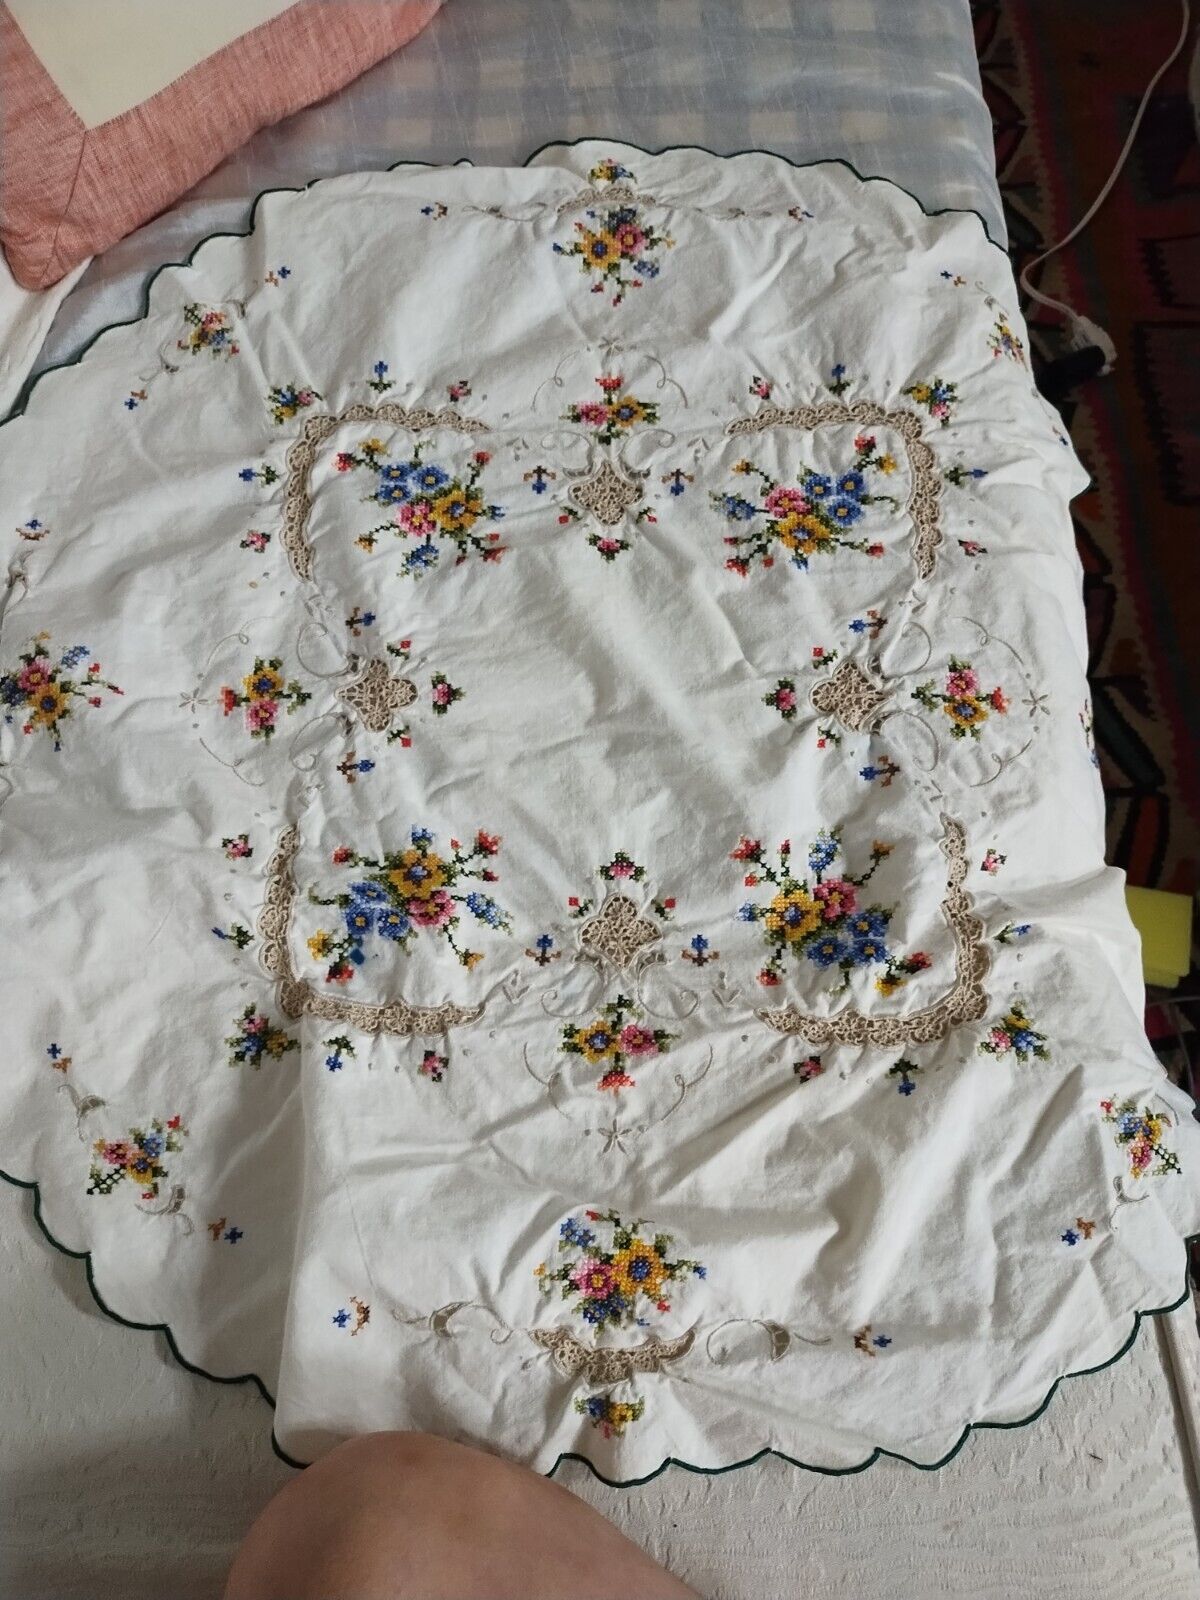 Vintage Rose Floral Embroidered Cross Stitch Tablecloth Round 30 inches